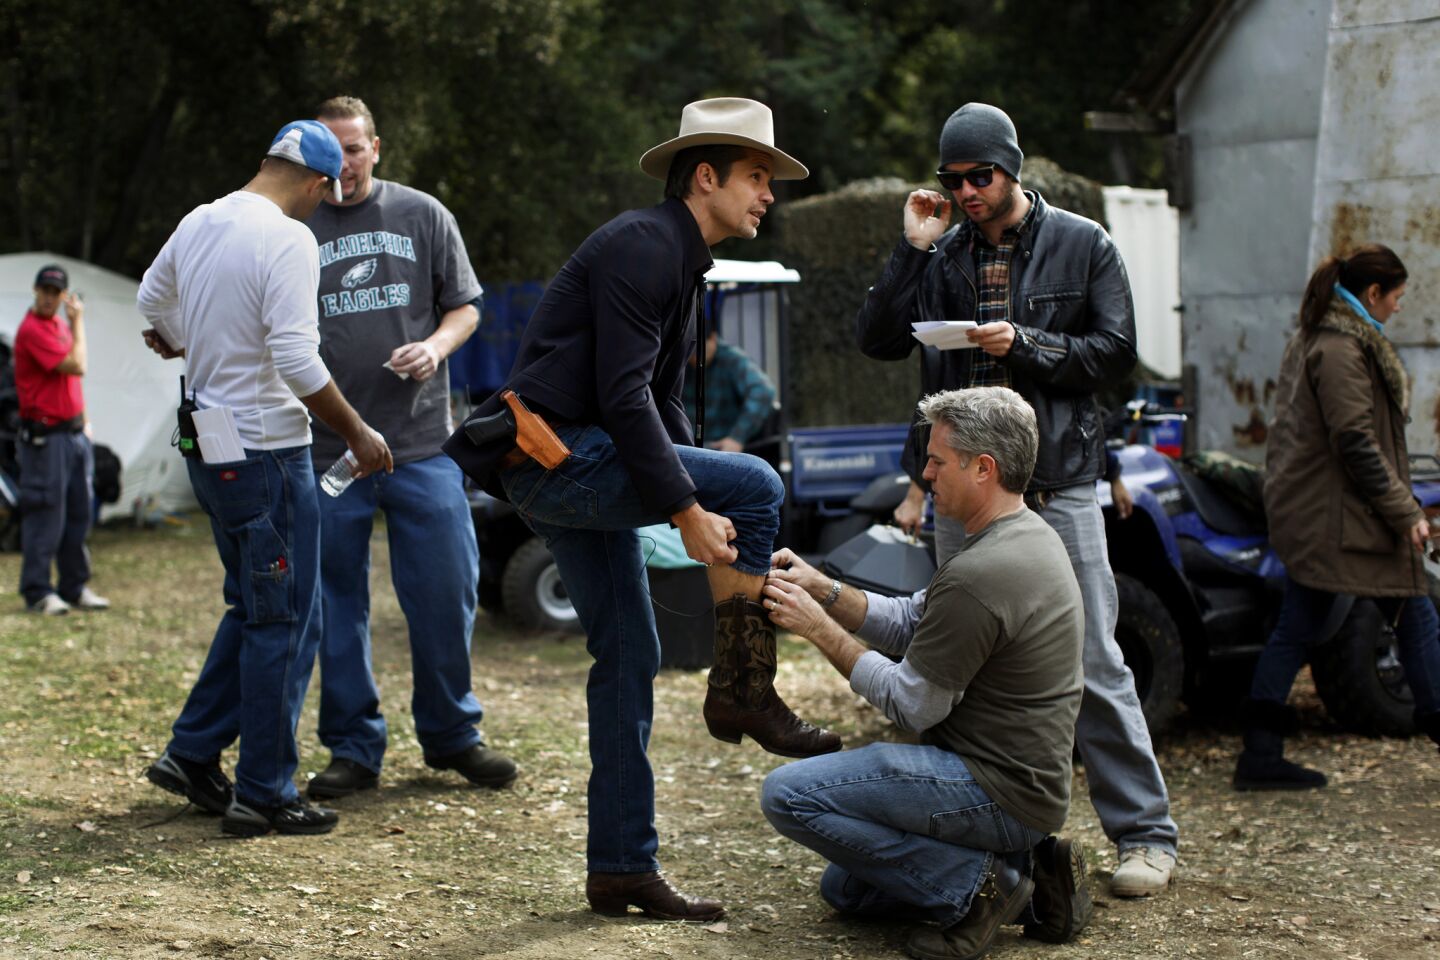 Actor Timothy Olyphant (in the cowboy hat) as Deputy U.S. Marshal Raylan Givens, is prepared for his microphone before shooting begins on the "Church of the Two-Stroke Jesus" set.